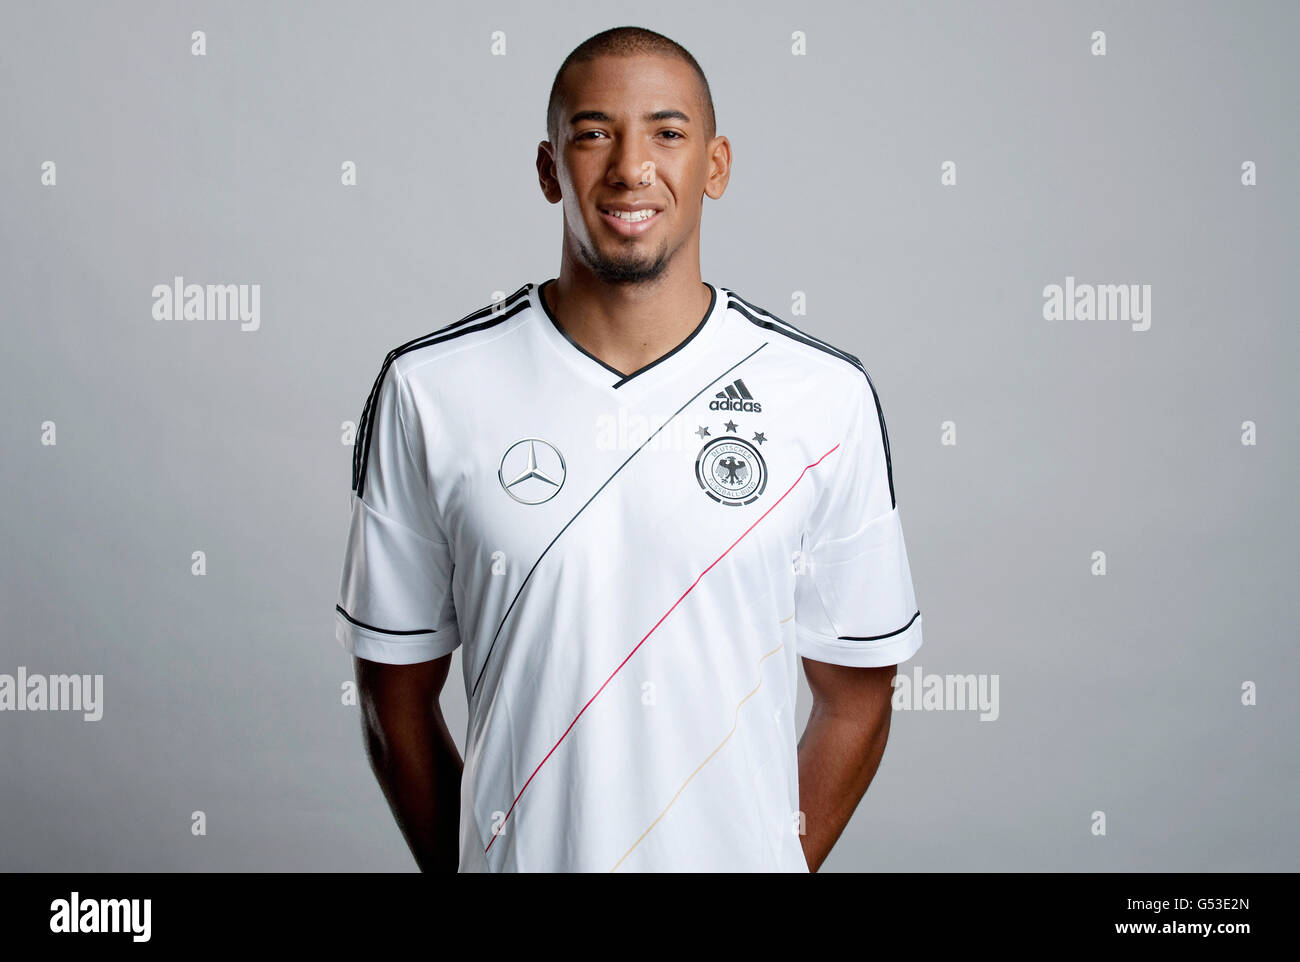 Jerome Boateng, at the official portrait photo session of the German men's national football team, on 14.11.2011, Hamburg Stock Photo